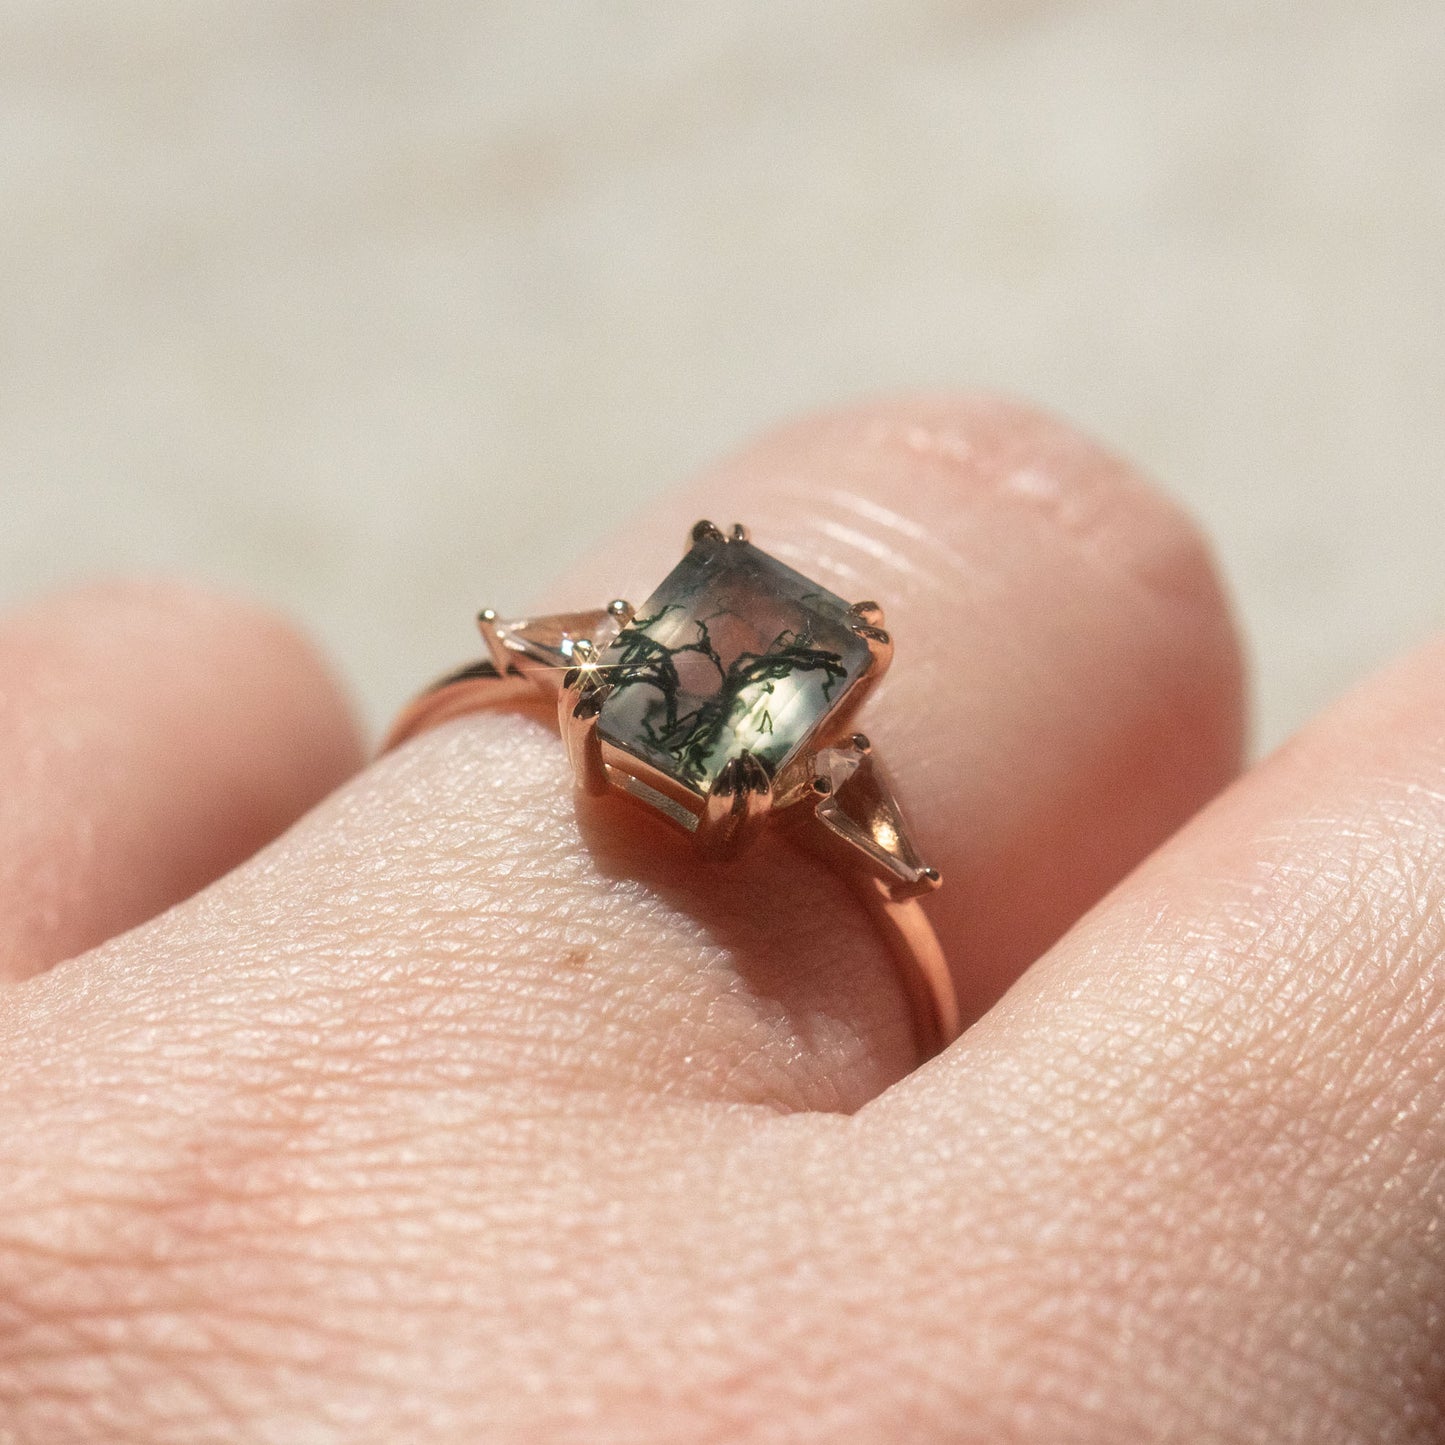 9kt Rose Gold Moss Agate and Topaz Annabelle Ring